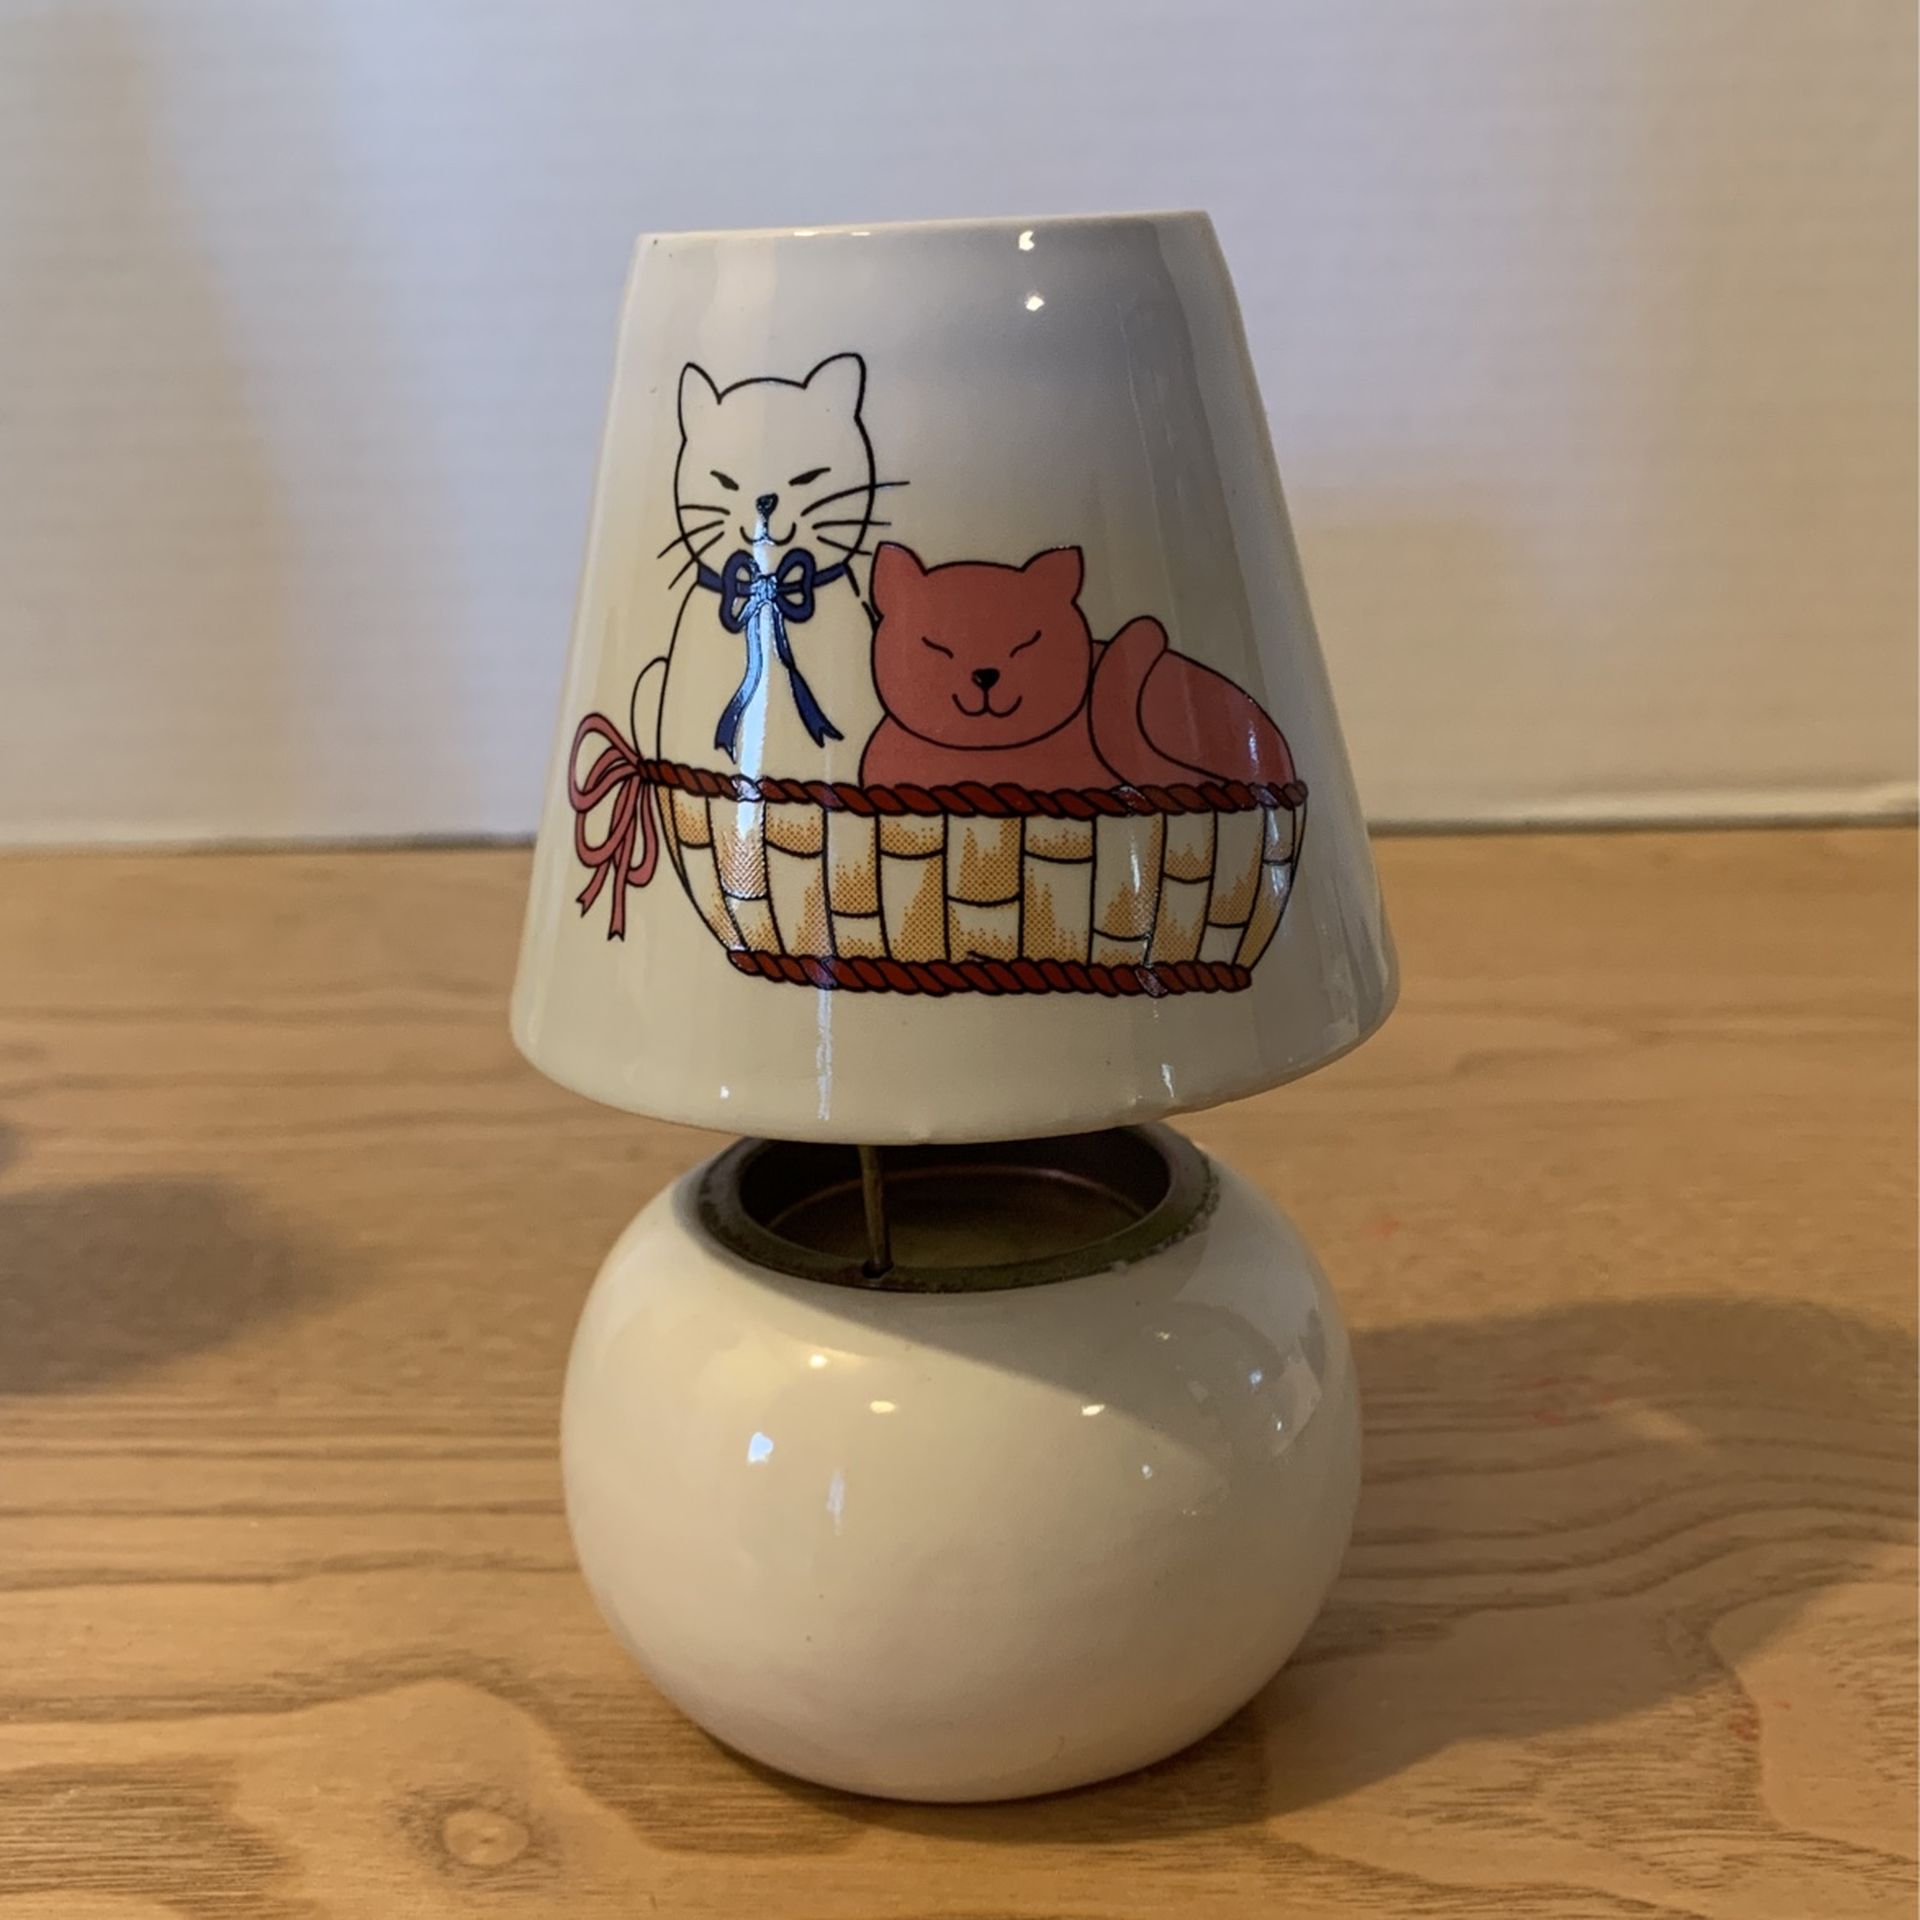 Vintage Kittens Candle Holder Lamp Ceramic 5 inches  A25